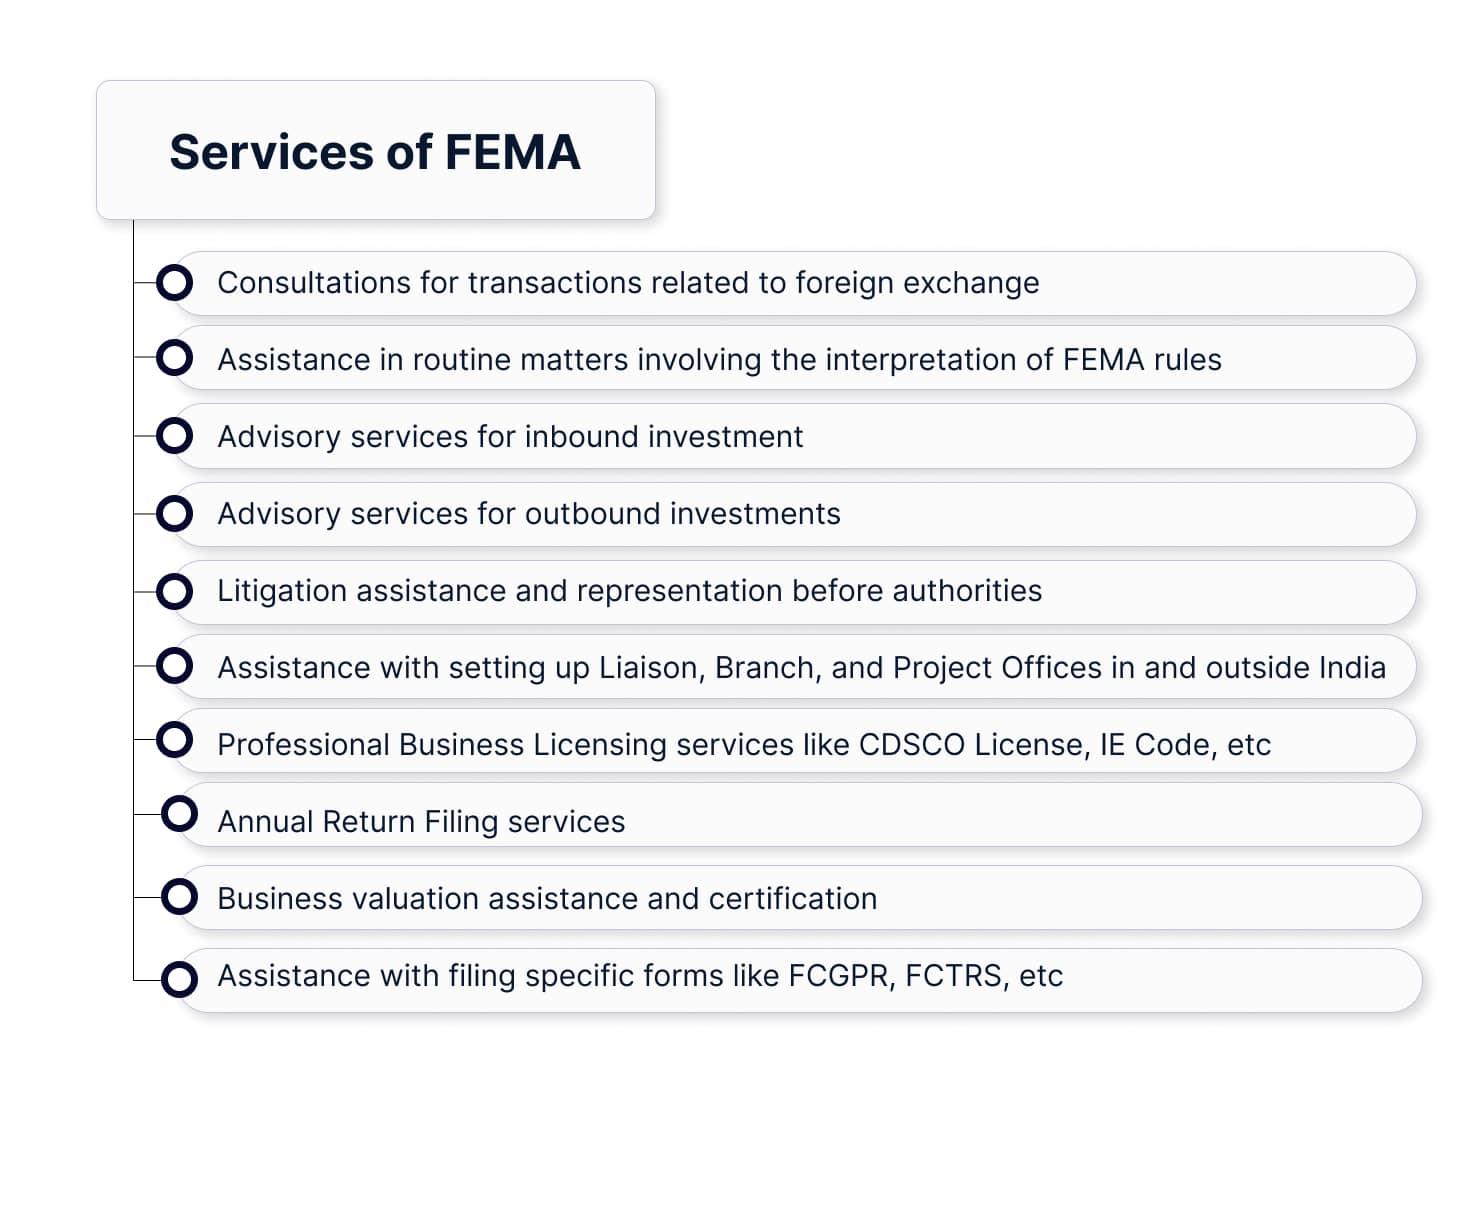 A list of services offers by FEMA